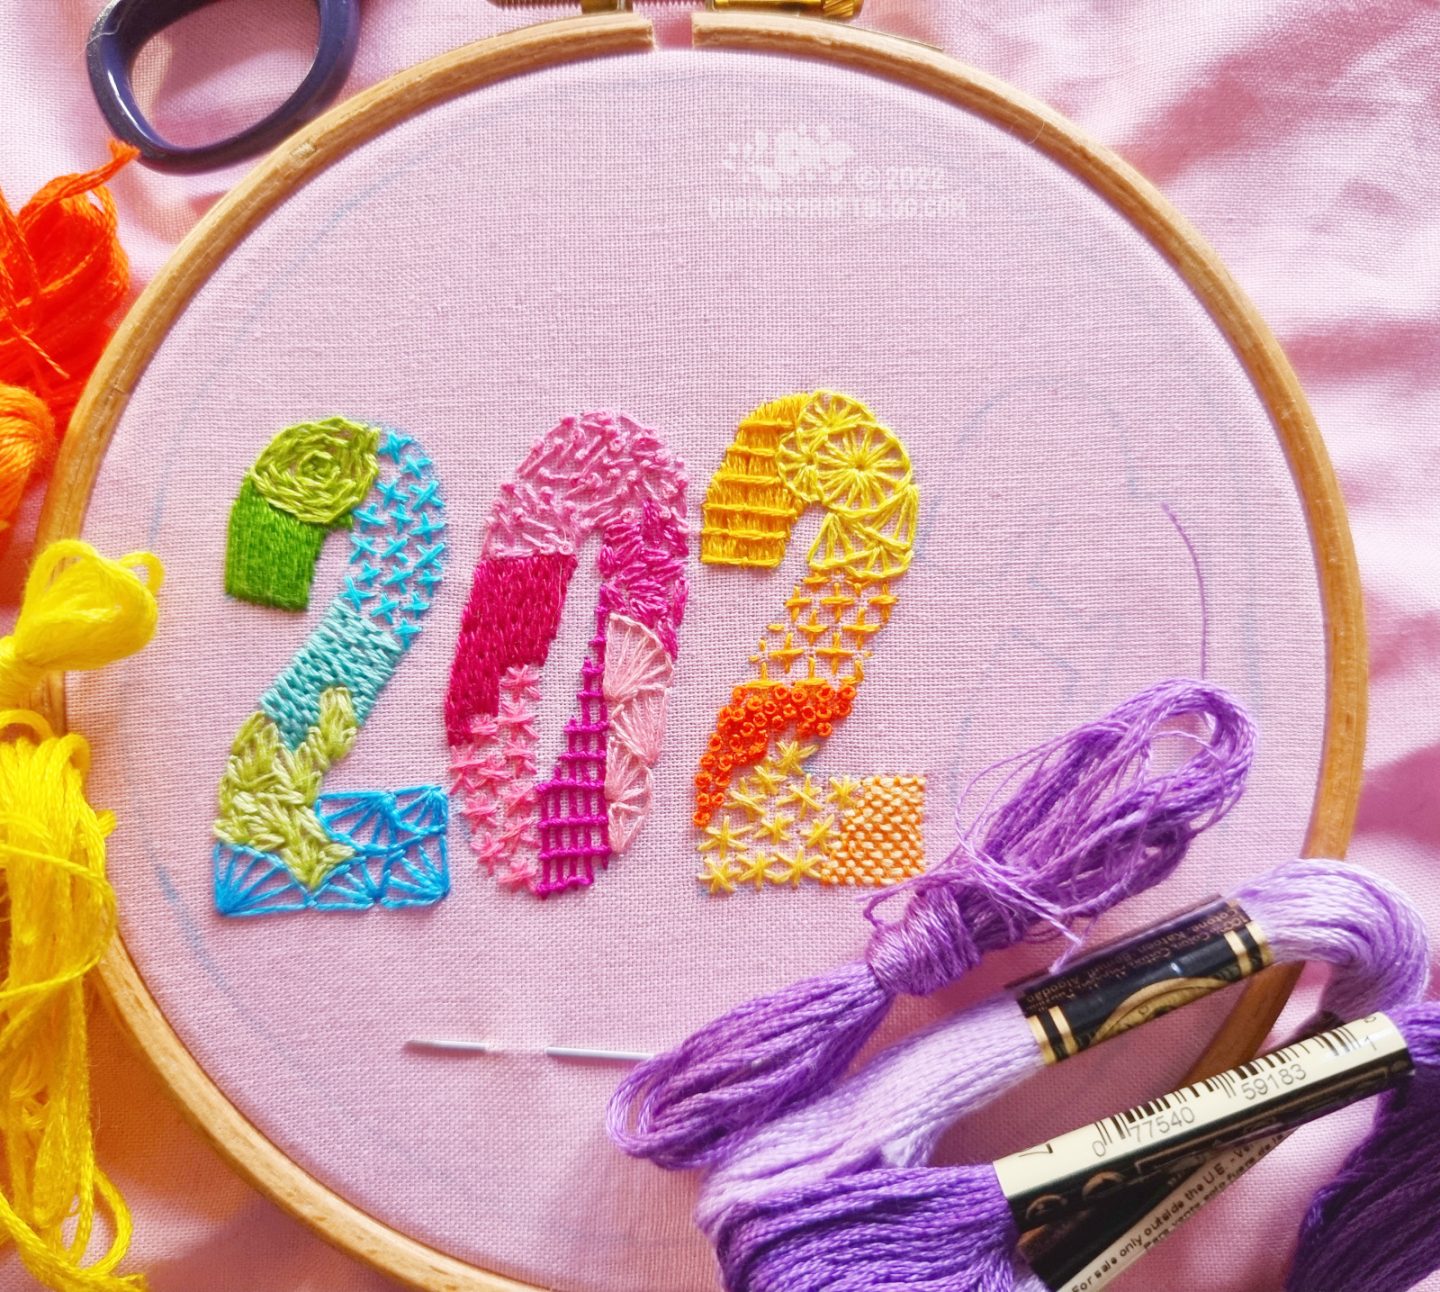 Light pink fabric in an embroidery hoop. On the fabric is drawn the number 2023. The number is filled in with various stitches in bright colours.